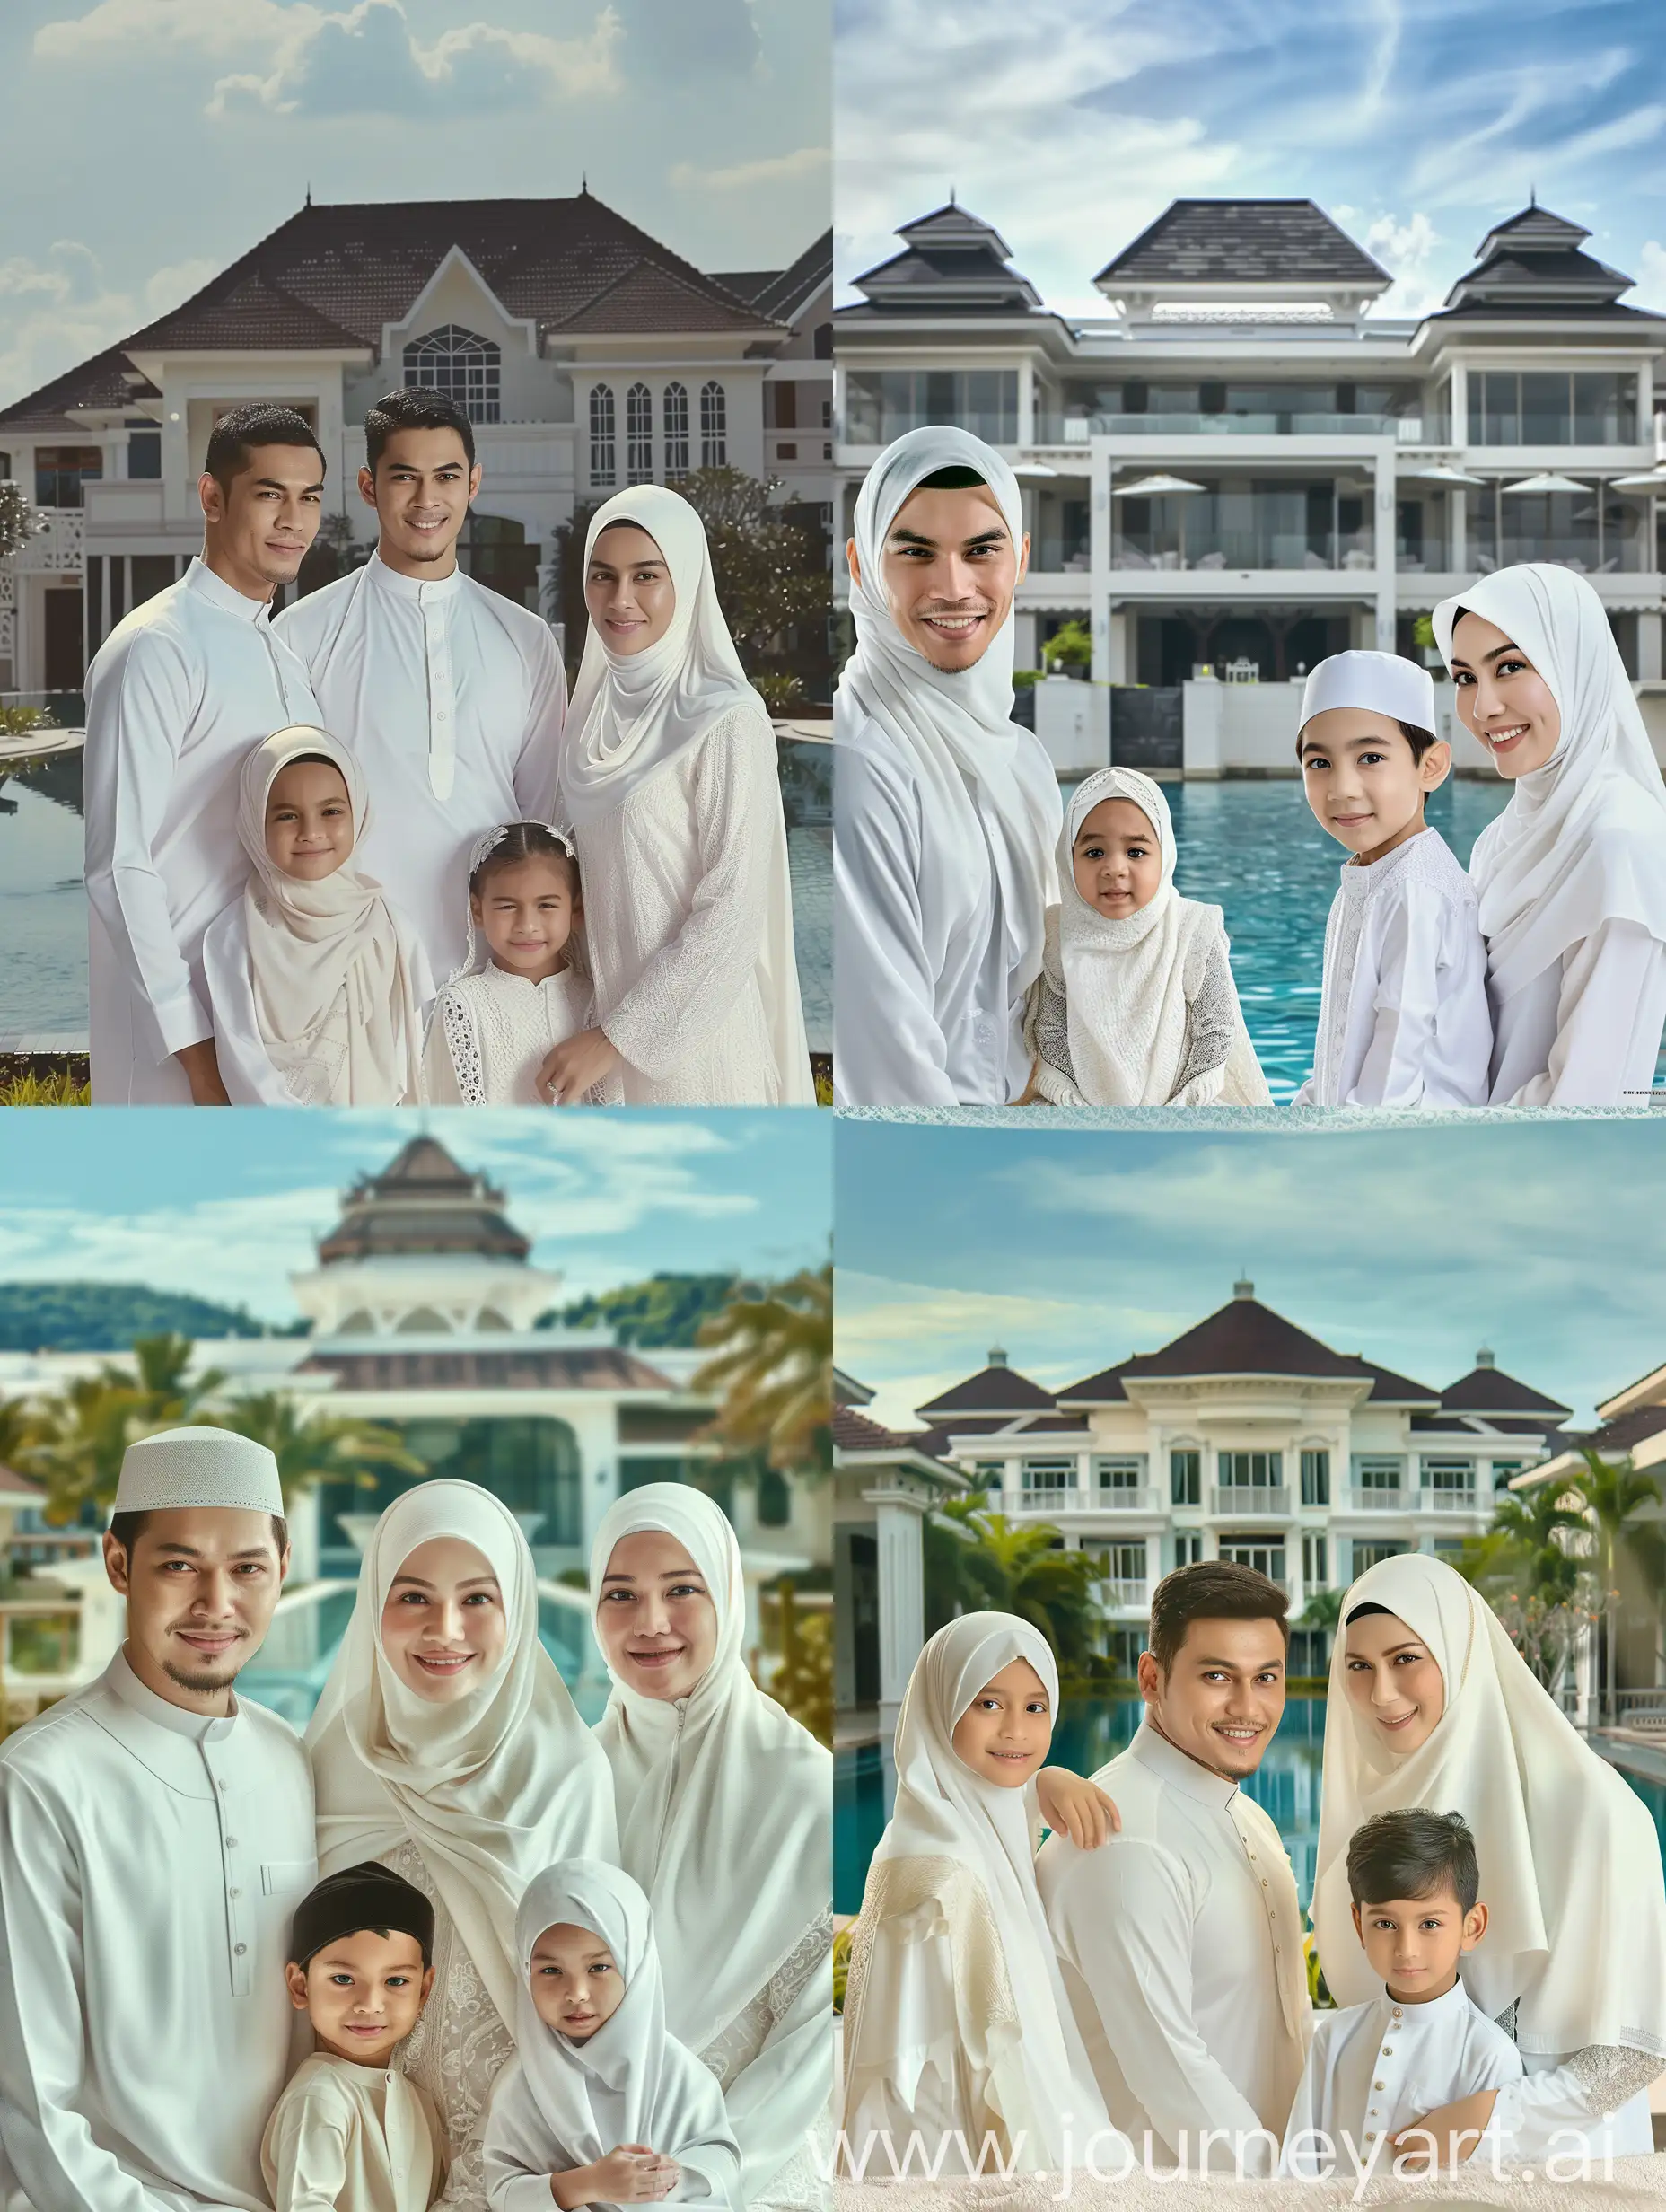 Youthful-Indonesian-Couple-in-Traditional-White-Muslim-Attire-with-Children-Luxurious-Background